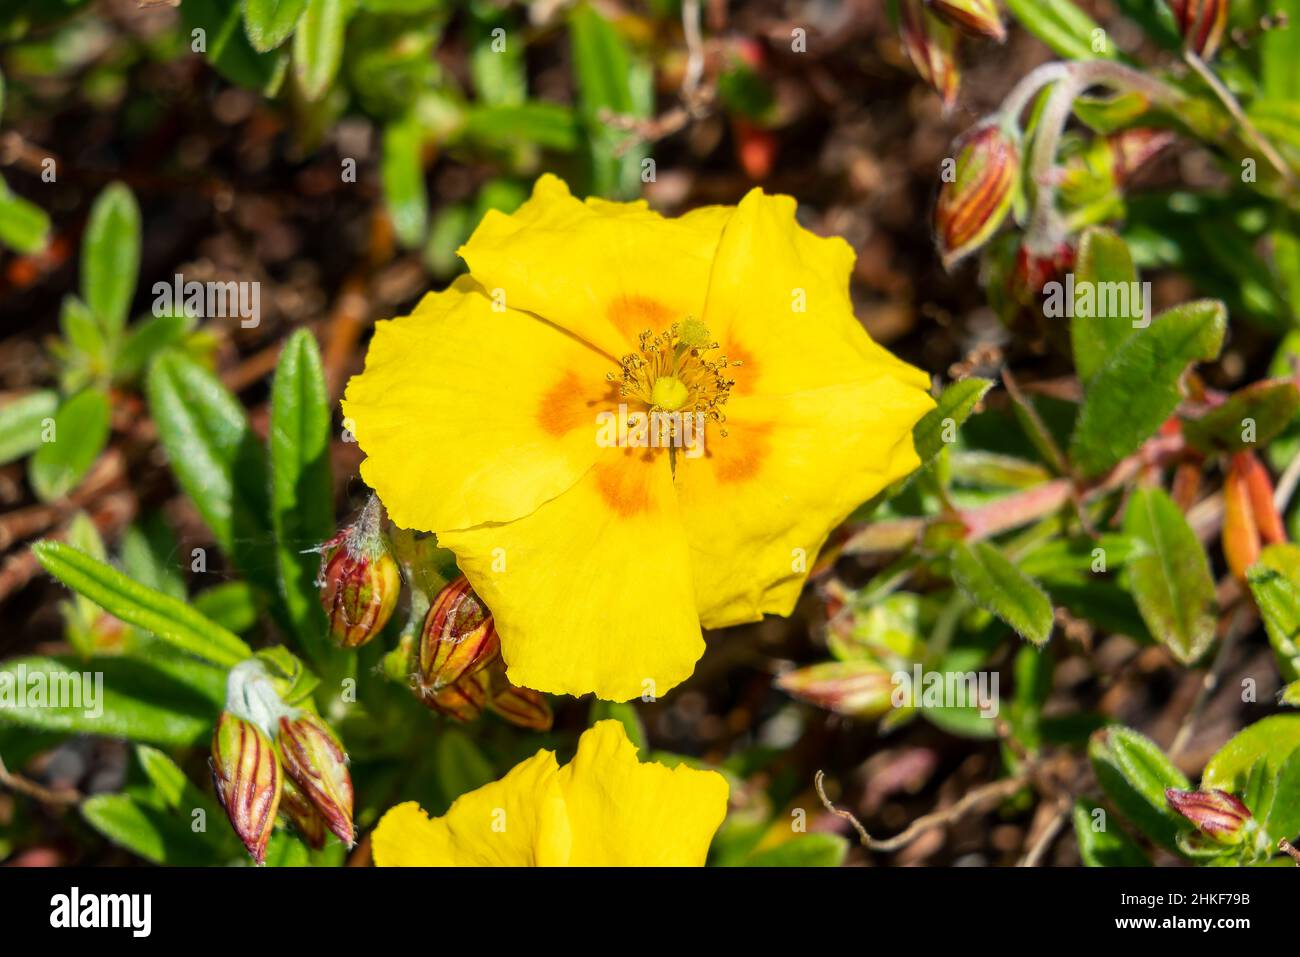 Helianthemum 'Ben Fhada' a summer flowering evergreen small shrub plant with an yellow orange  summertime flower commonly known as rock rose, stock ph Stock Photo